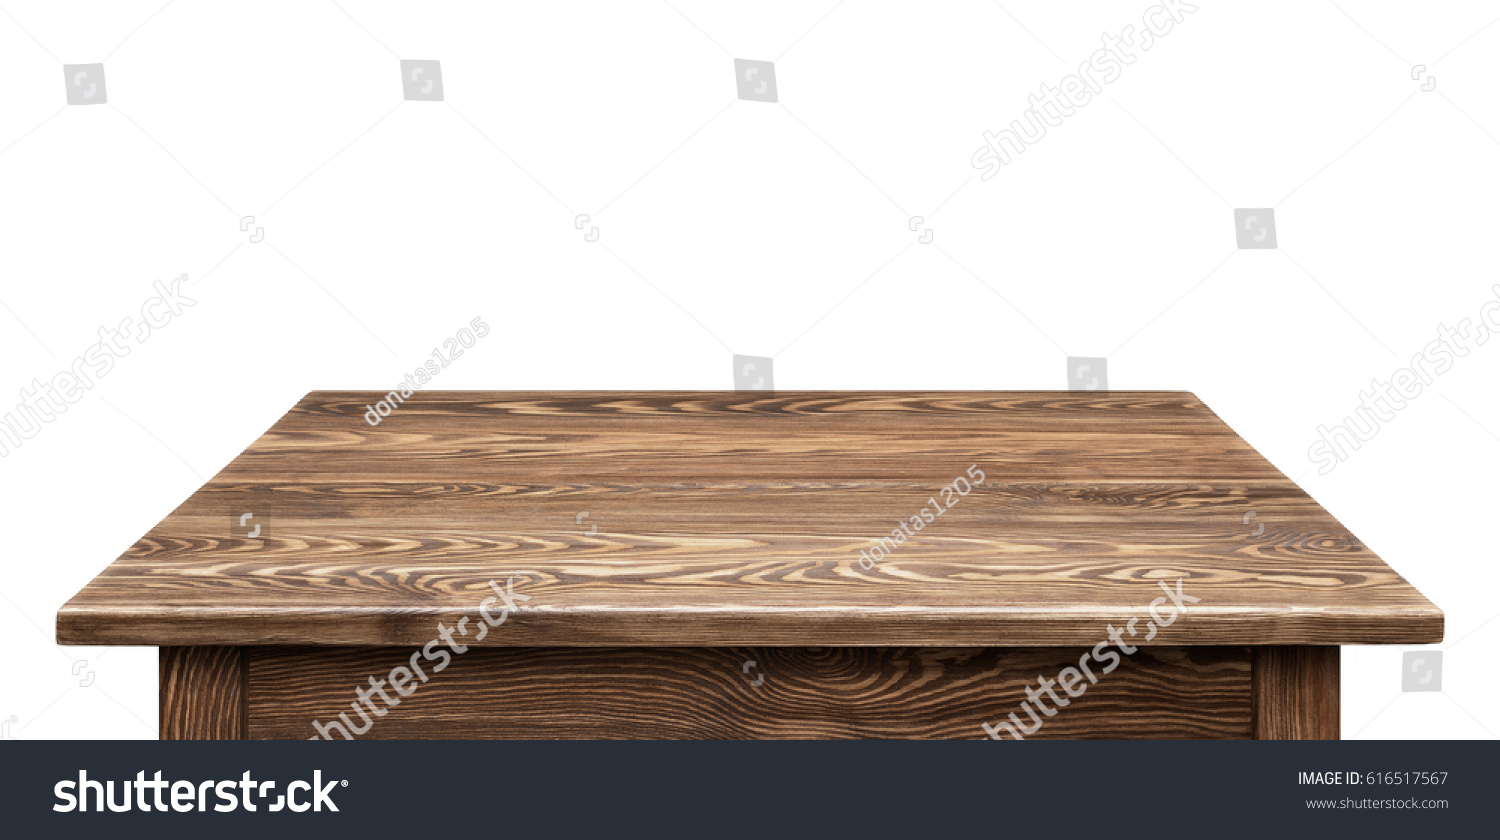 Wooden tabletop on white background. Empty rustic wood table. #616517567